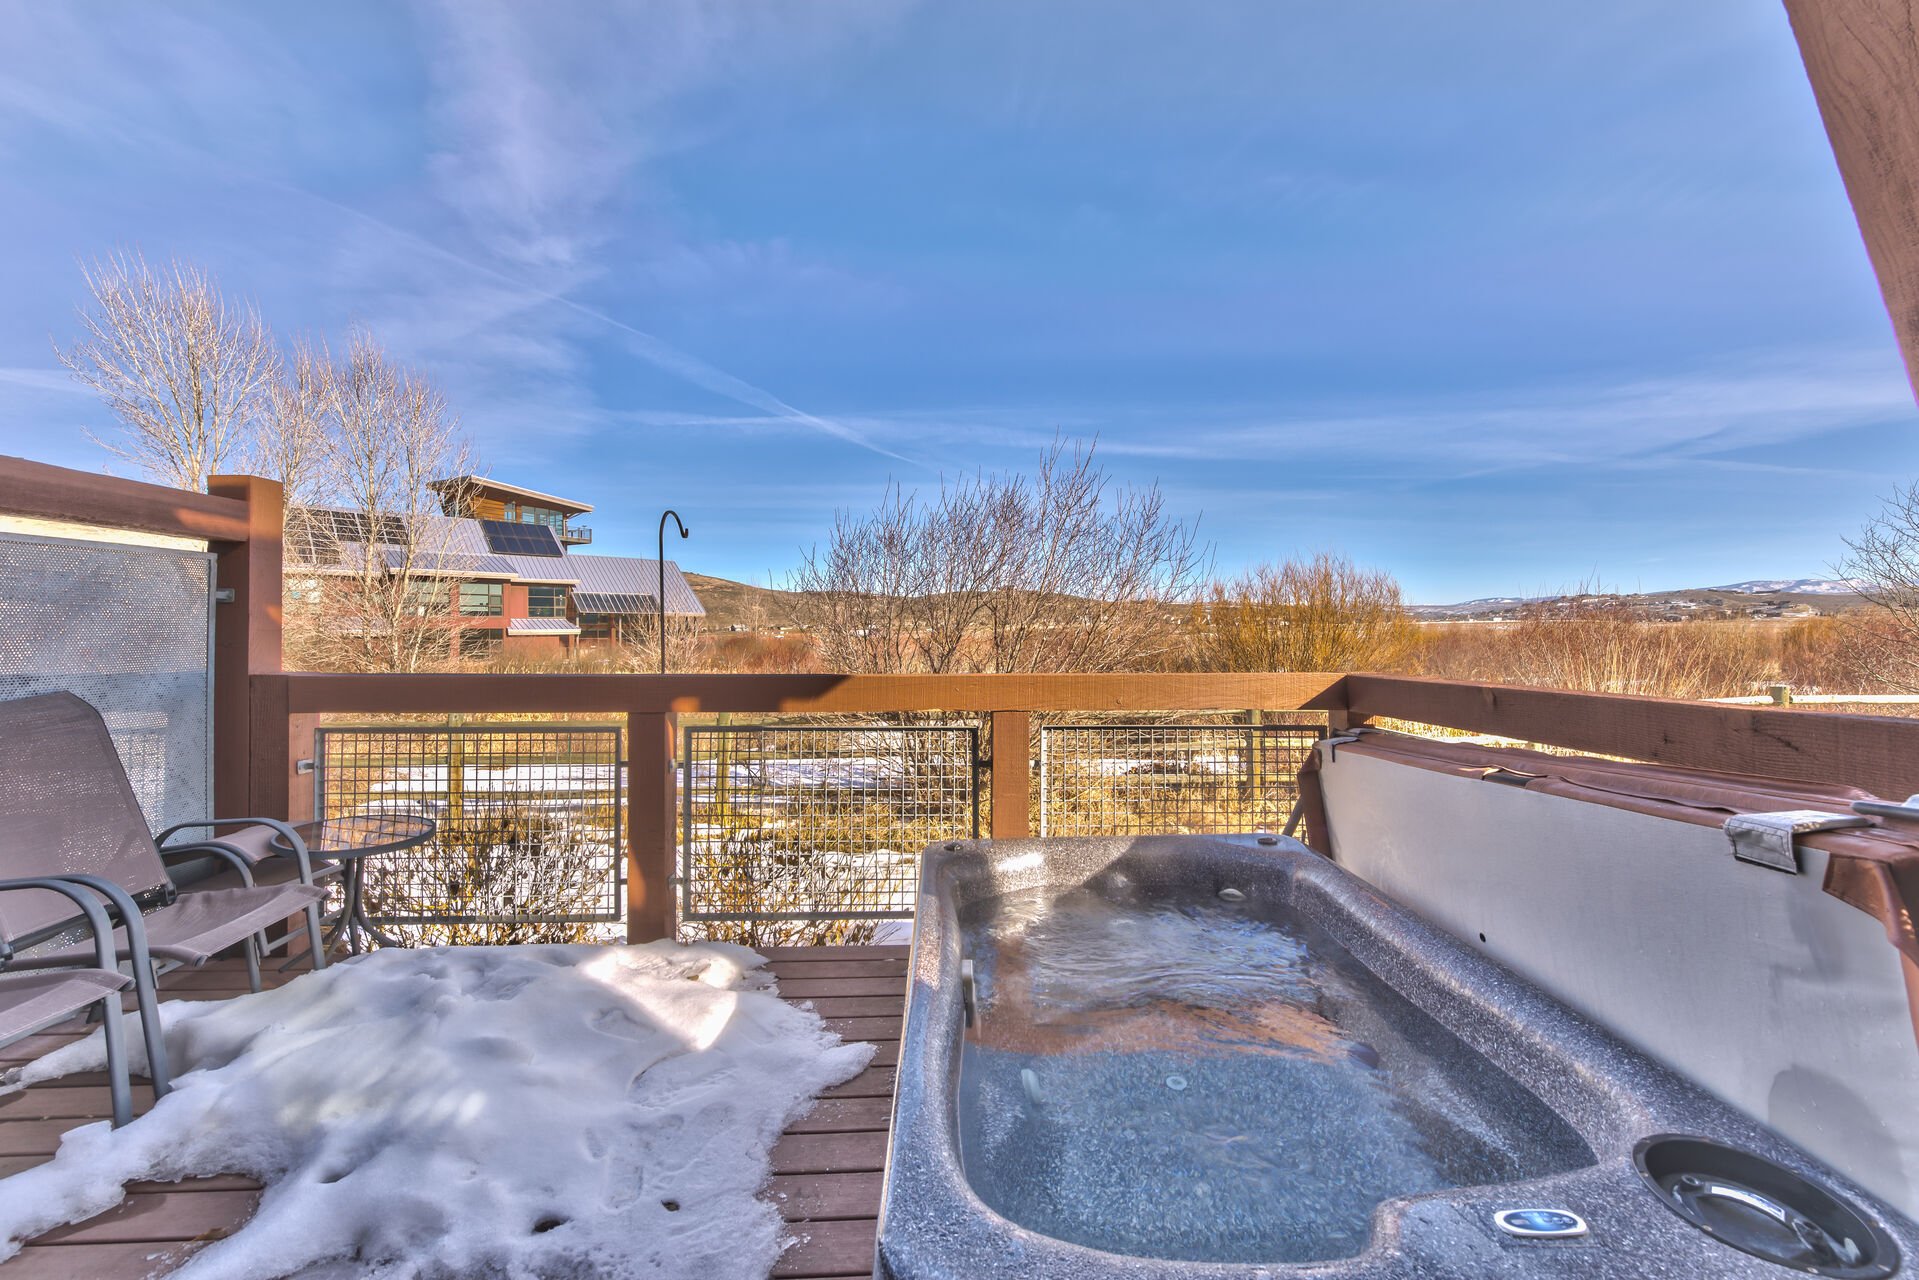 2-Person Hot Tub on Lower Deck with Swaner Preserve and Mountain Views